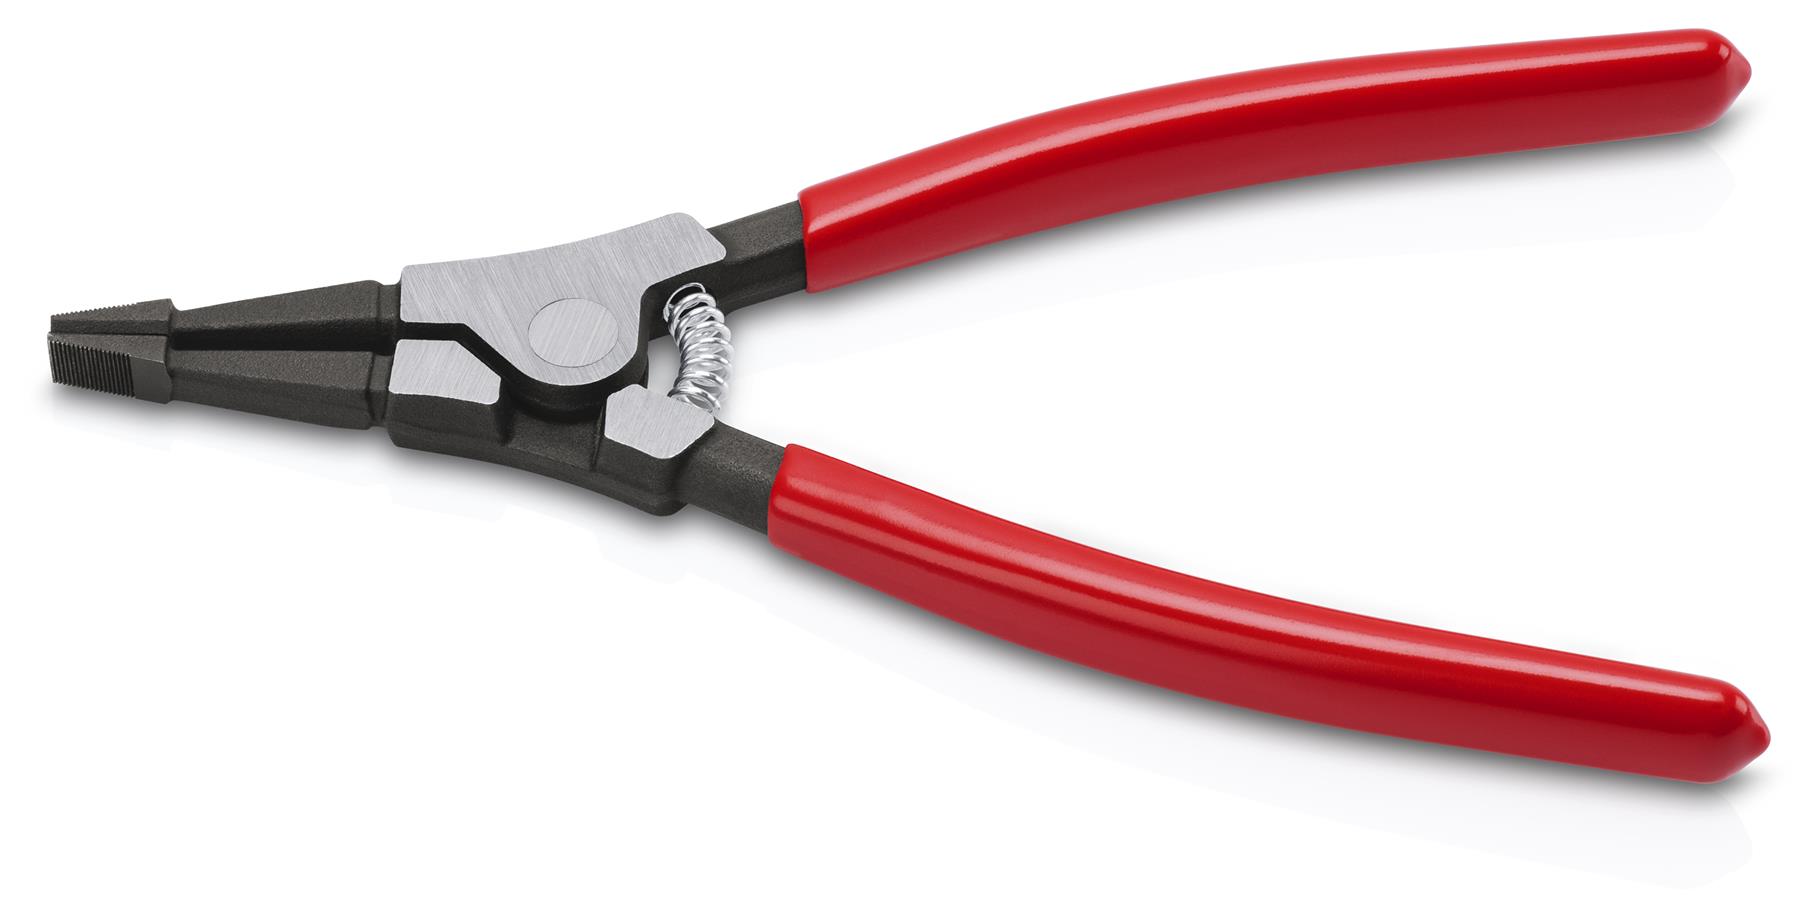 KNIPEX Special Retaining Ring Pliers 170mm for Retaining Rings on Shafts Circlip Plier Plastic Coated Handles 3.6mm 45 11 170